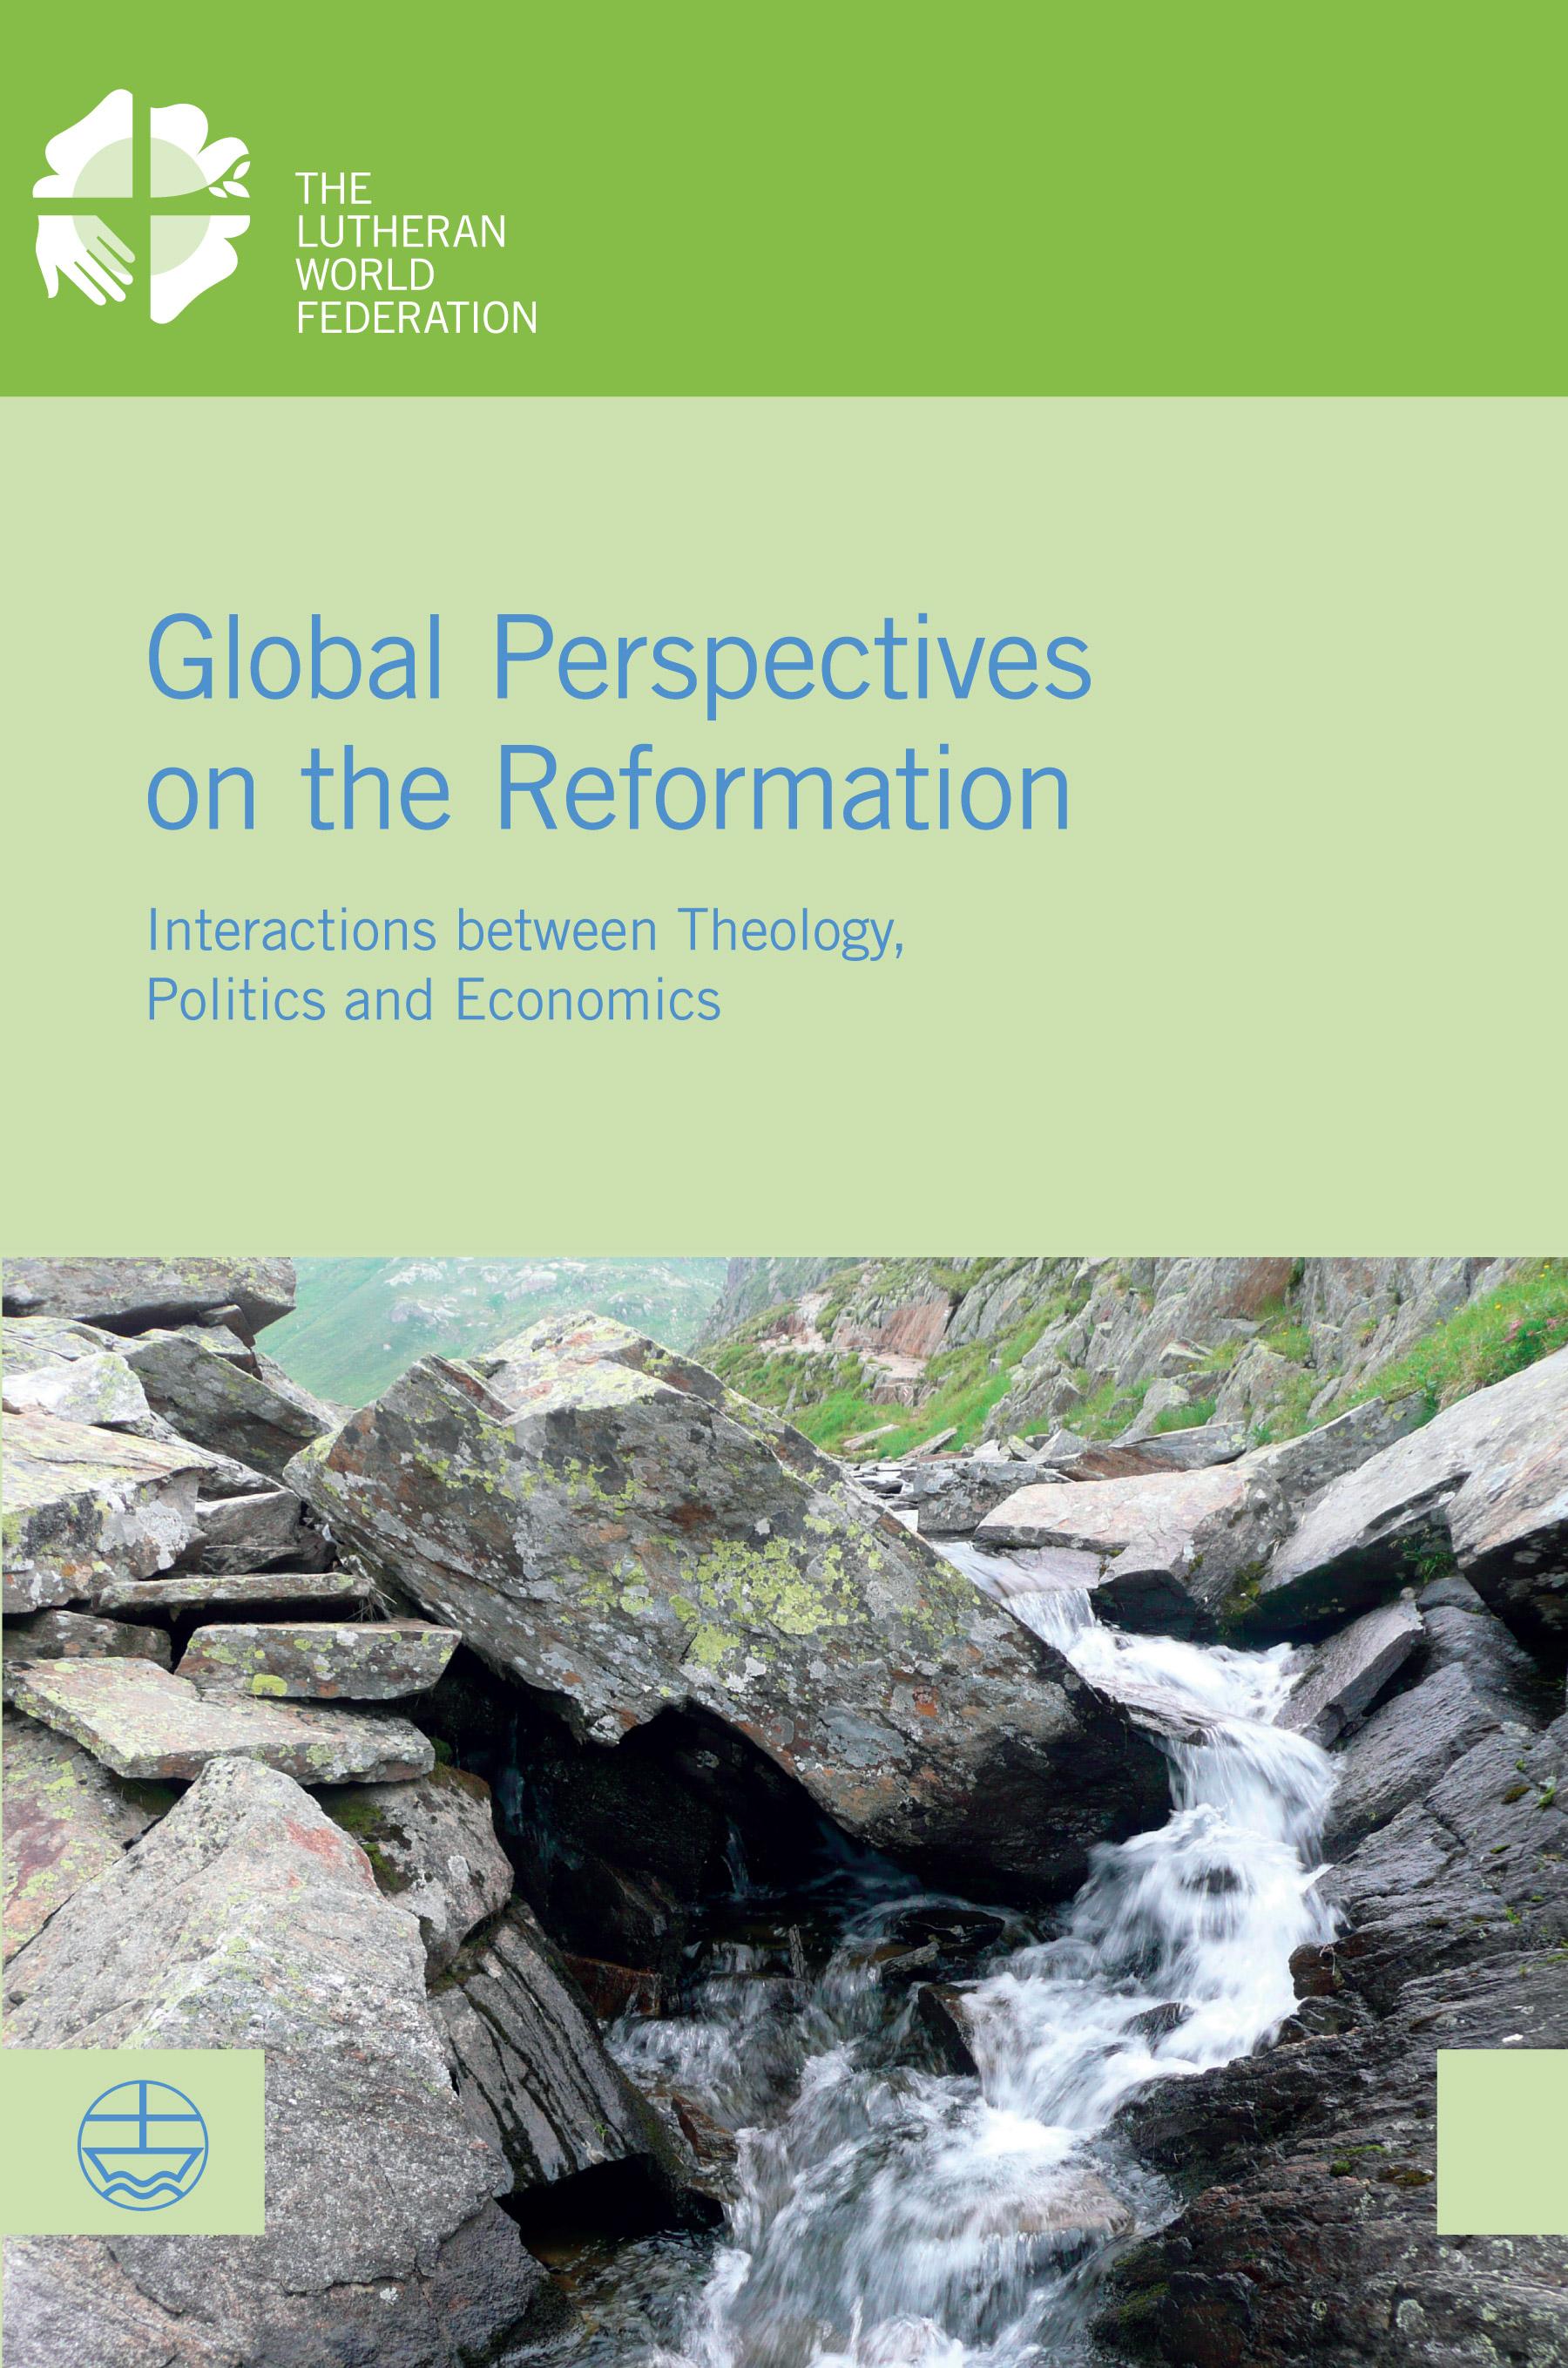 Global Perspectives on the Reformation: Interactions between Theology, Politics and Economics